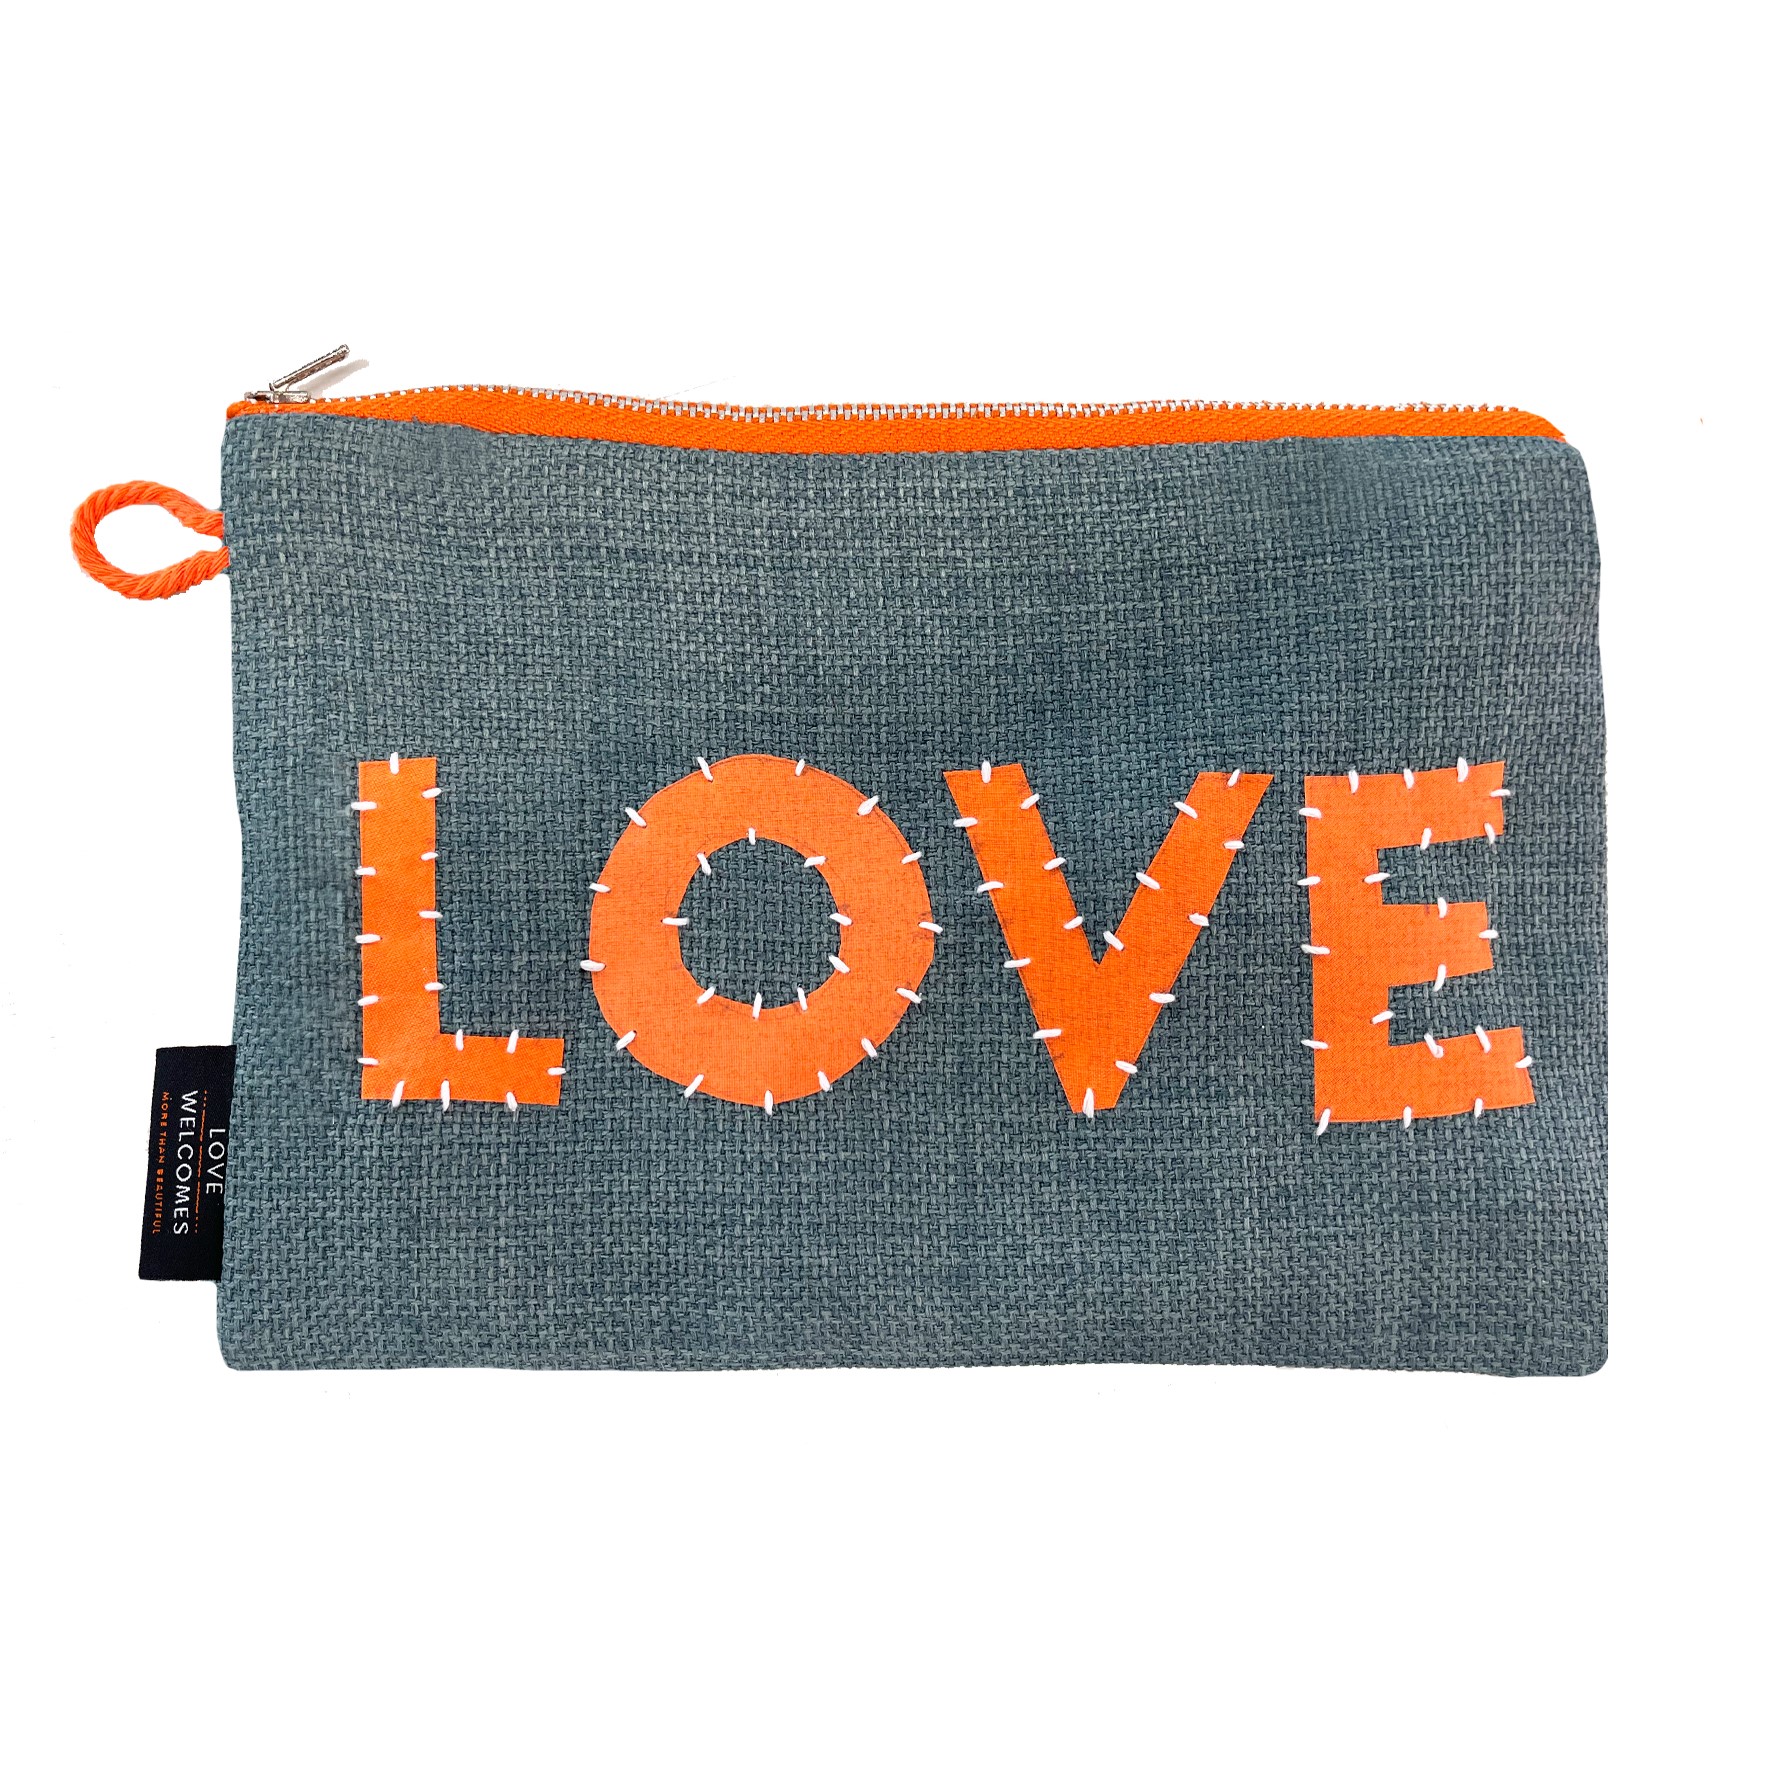 Washbag made from recycled materials with the word love embroidered